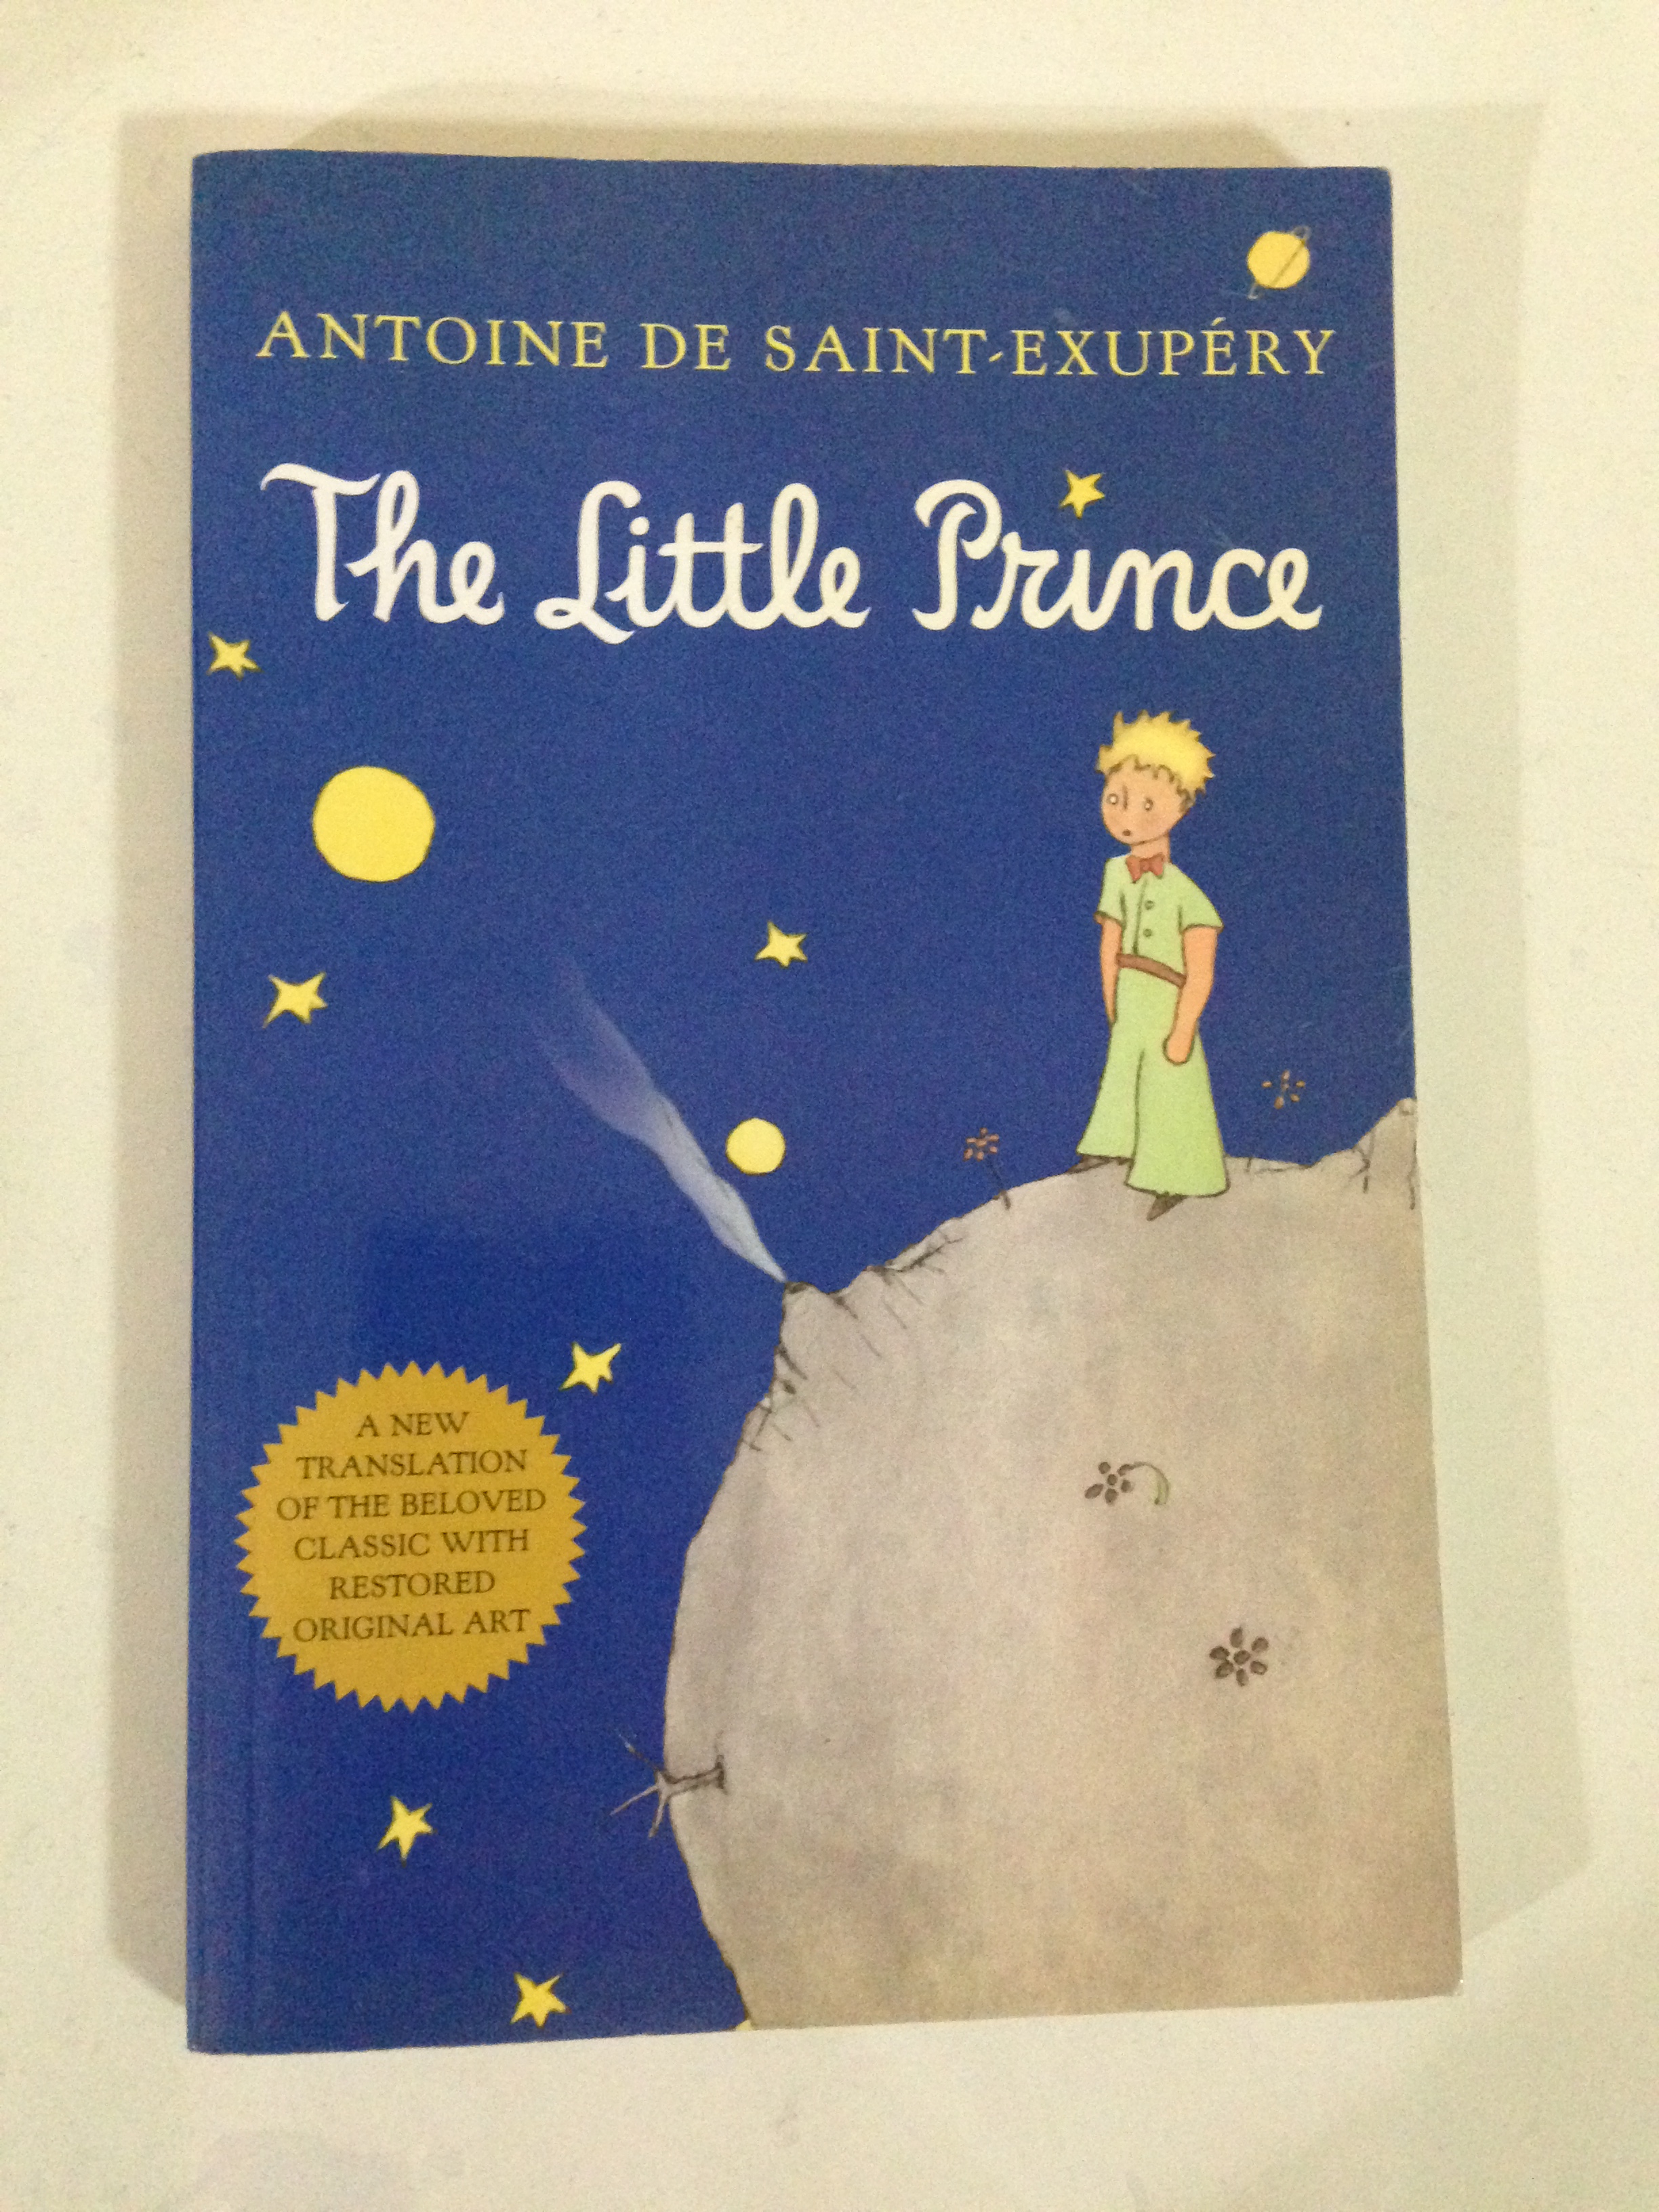 "The Little Prince" book cover.